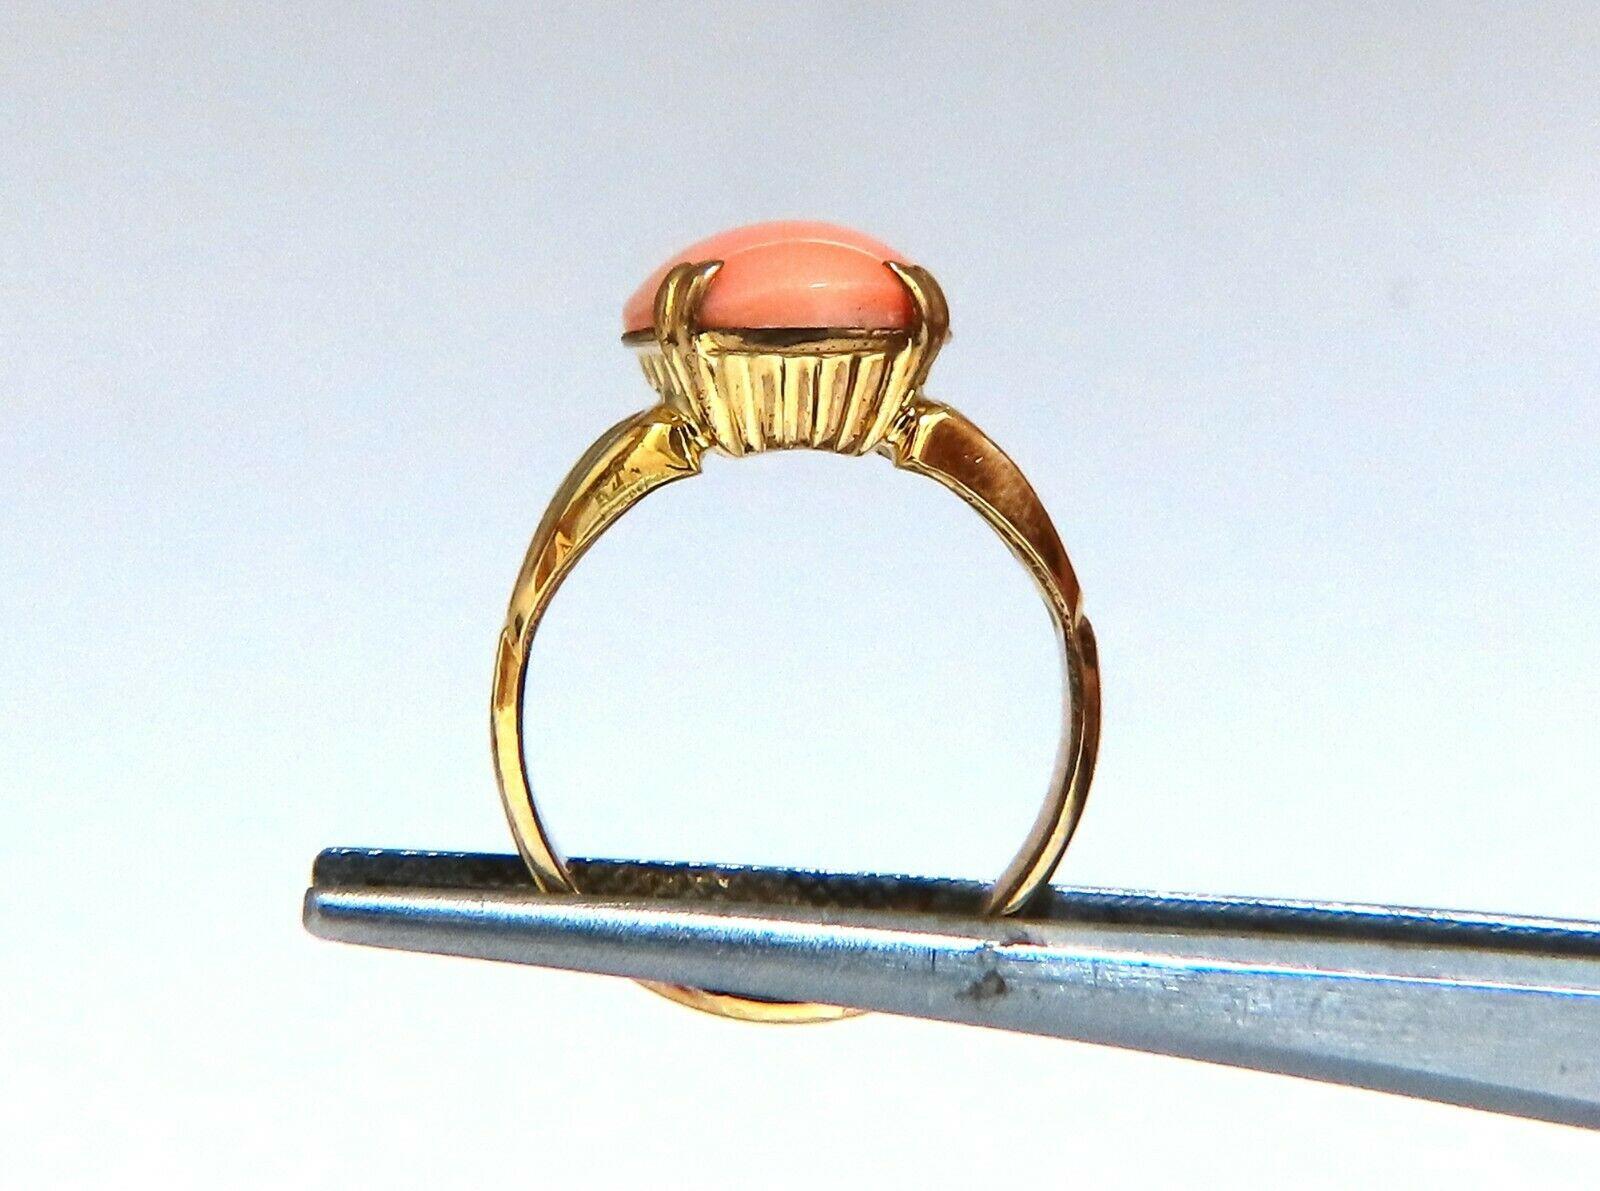 4ct. Vintage natural Coral ring.

Pink Coral measures 12x10 mm

Depth of ring 6.9 mm.

10 karat yellow gold 2.6 grams.

Current size 5 1/2 and we may resize, please inquire.